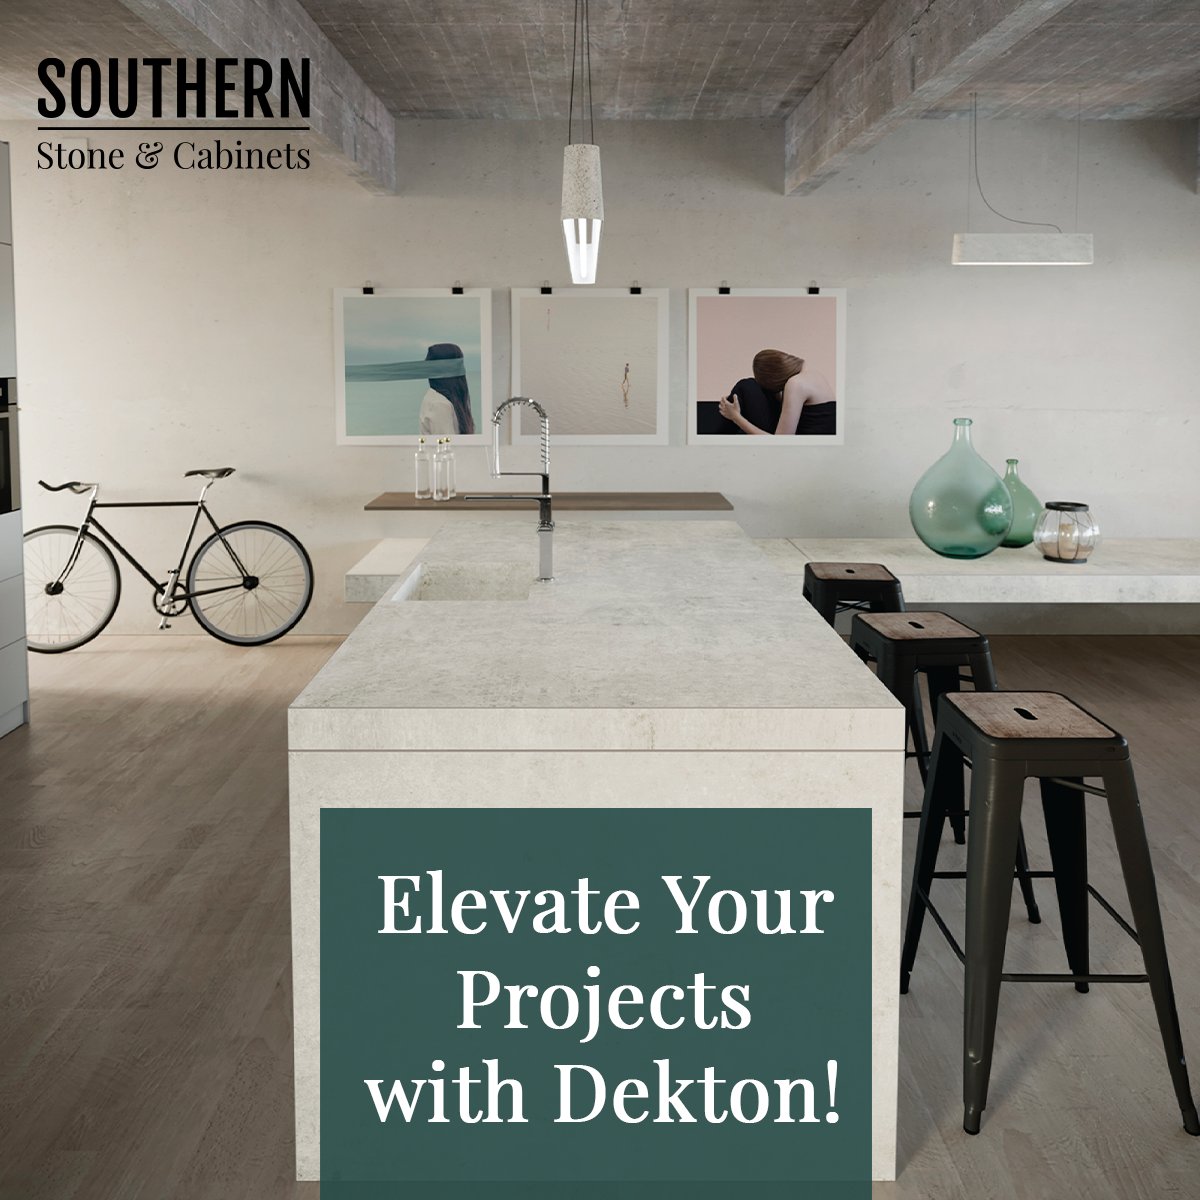 Dekton redefines the concept of surface aesthetics, offering an extensive palette of colors, textures, and finishes to suit 

Call us at 662-265-8132 to learn more.

mysouthernstone.com

#southernstone #dektonbycosentino #countertop #cosentino #dekton